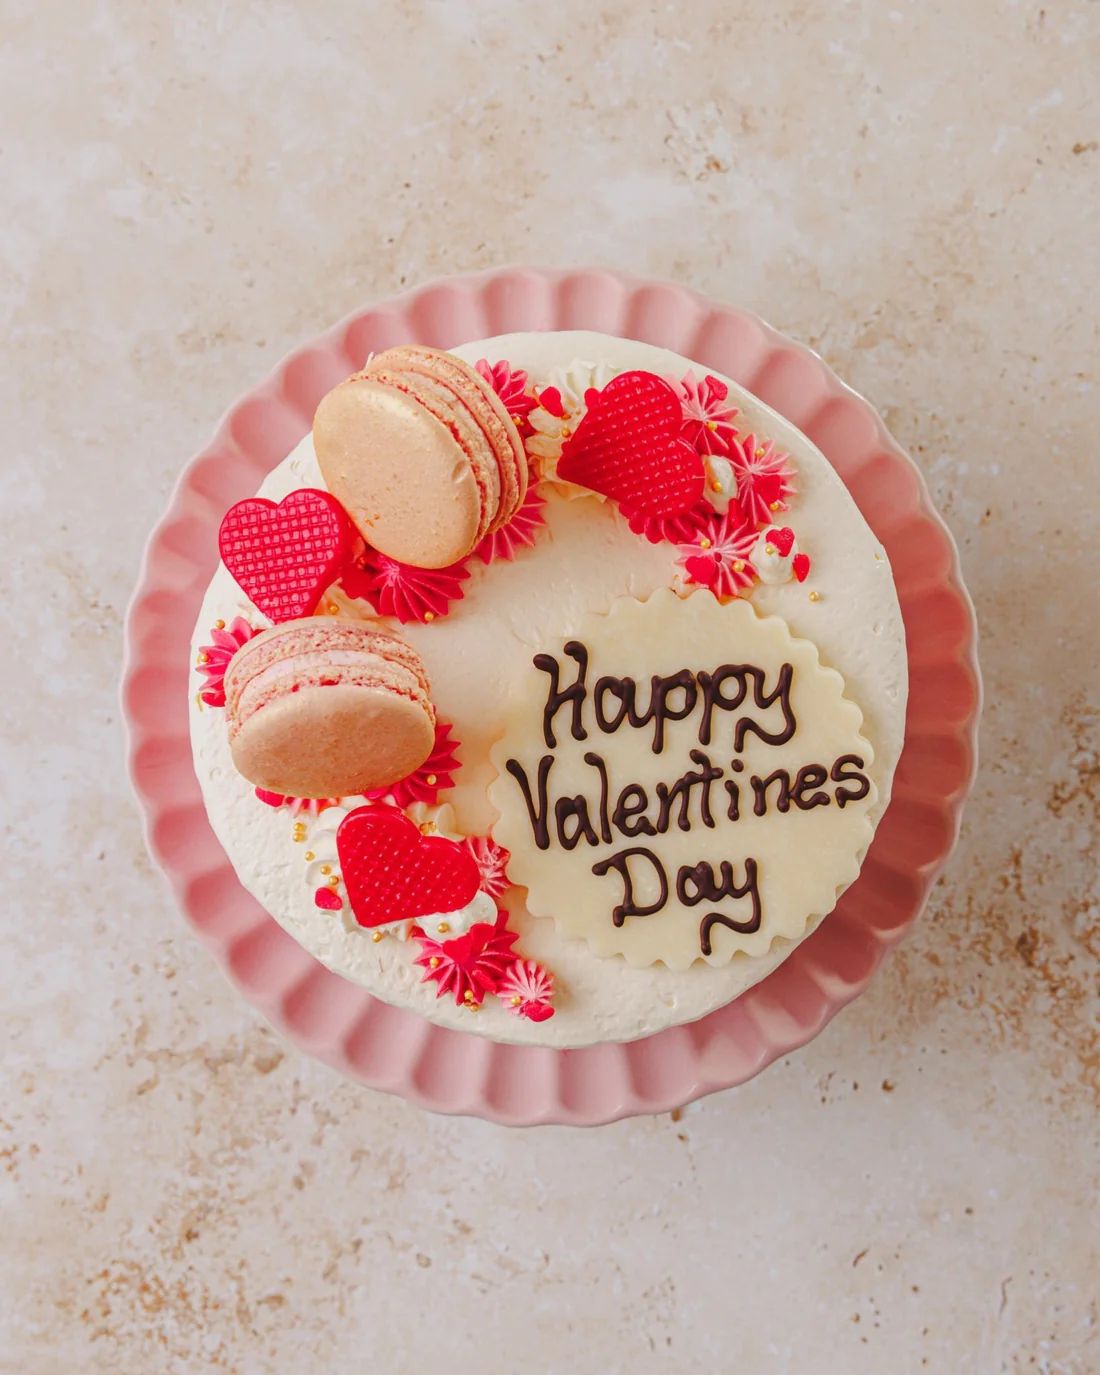 Sweet Delights for Your Sweetheart: Ideas For Valentines Day Cakes and Tasty Treats - Patisserie Valerie